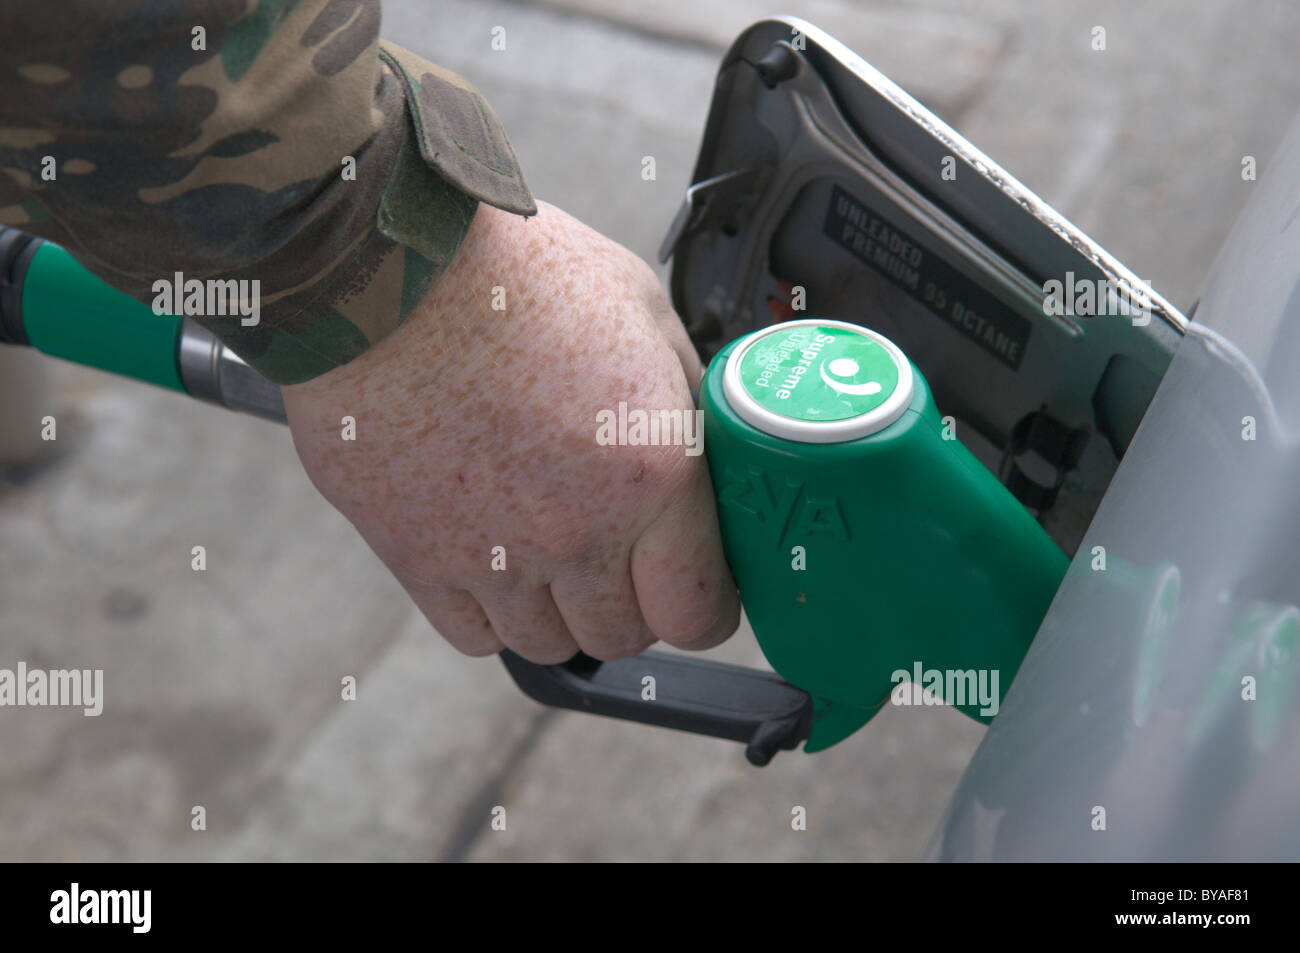 Filling car with fuel. Unleaded petrol. UK Stock Photo